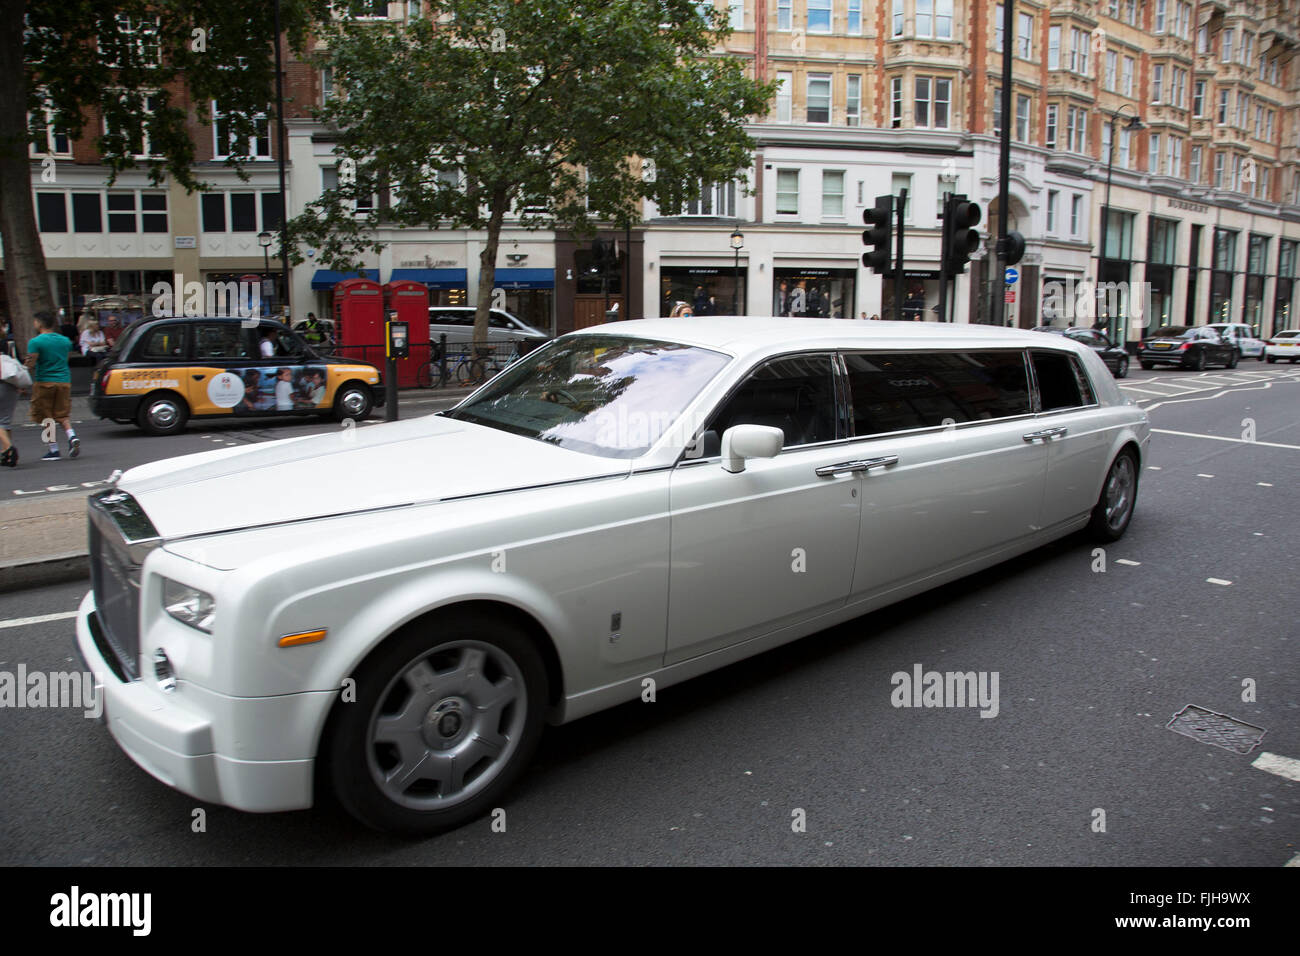 Stretch limousine Rolls Royce in Knightsbridge, London, UK. IN this wealthy part of West London, examples of extreme wealth and exclusive lifestyle are oppulantly on show everywhere you look. The choice of what car you drive or what clothes you wear all gives off an appearance of your rich status. Stock Photo